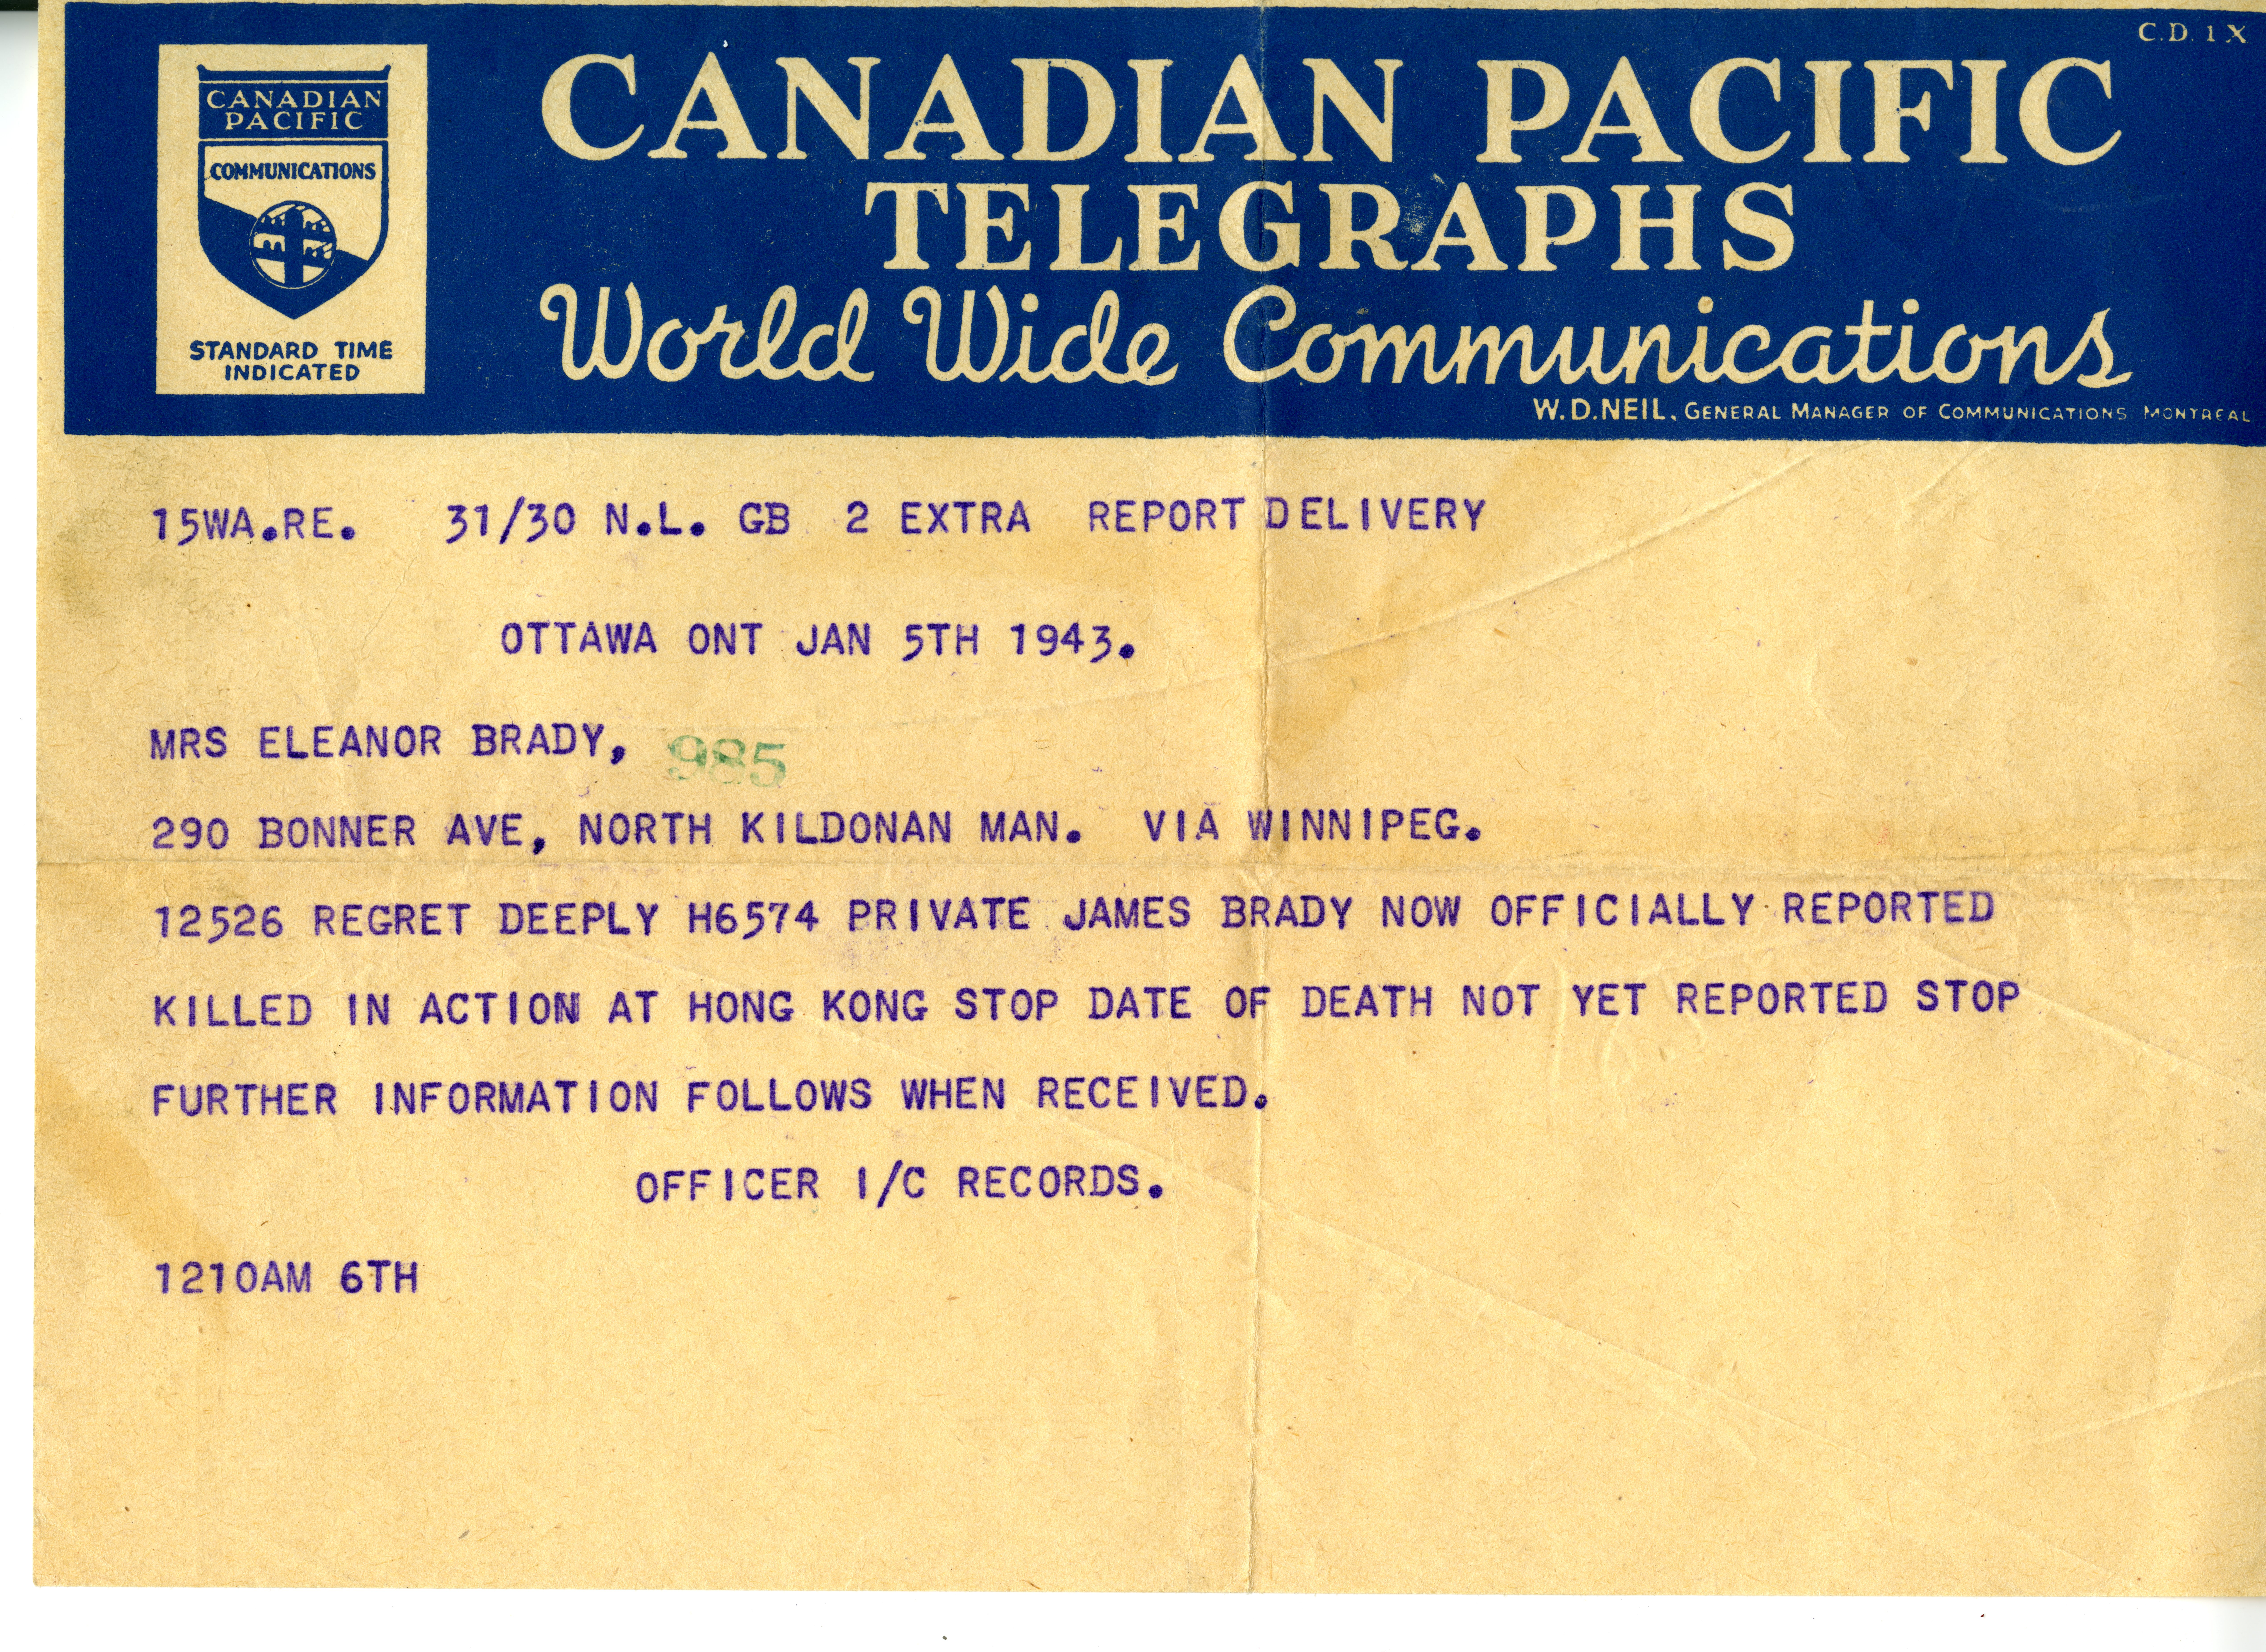 Telegram bearing the news that Private James Brady was killed in action at Hong Kong.